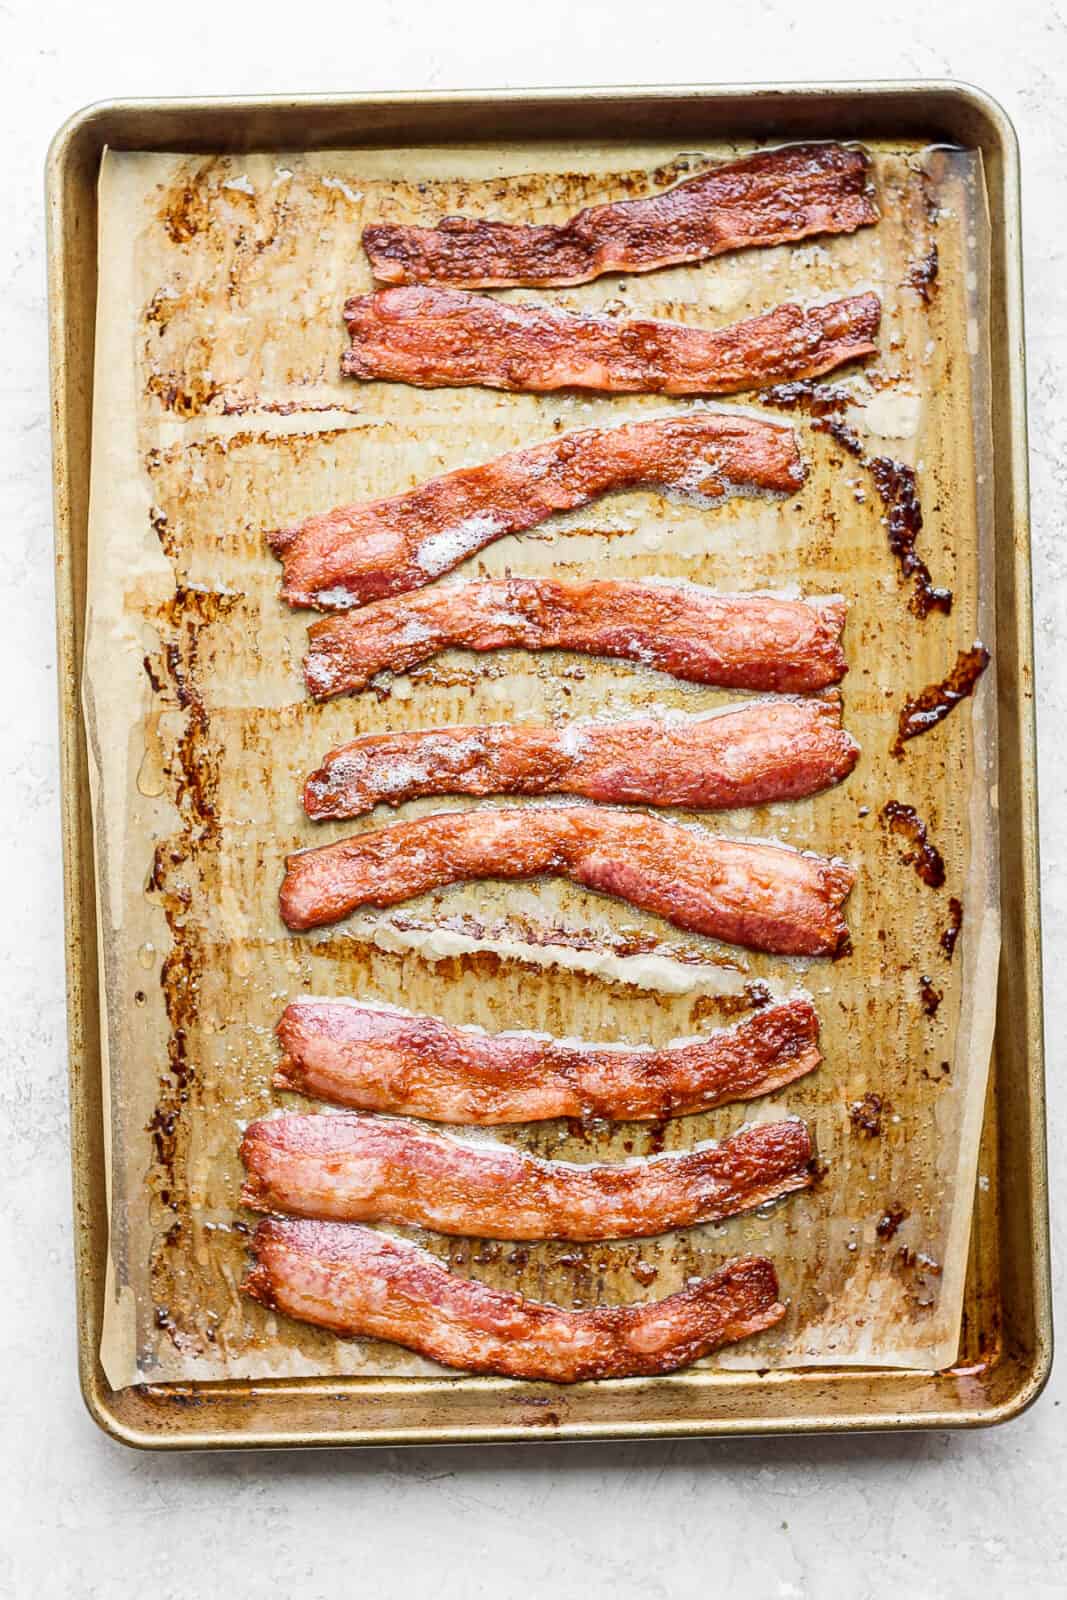 Bacon on a parchment-lined baking sheet after baking.